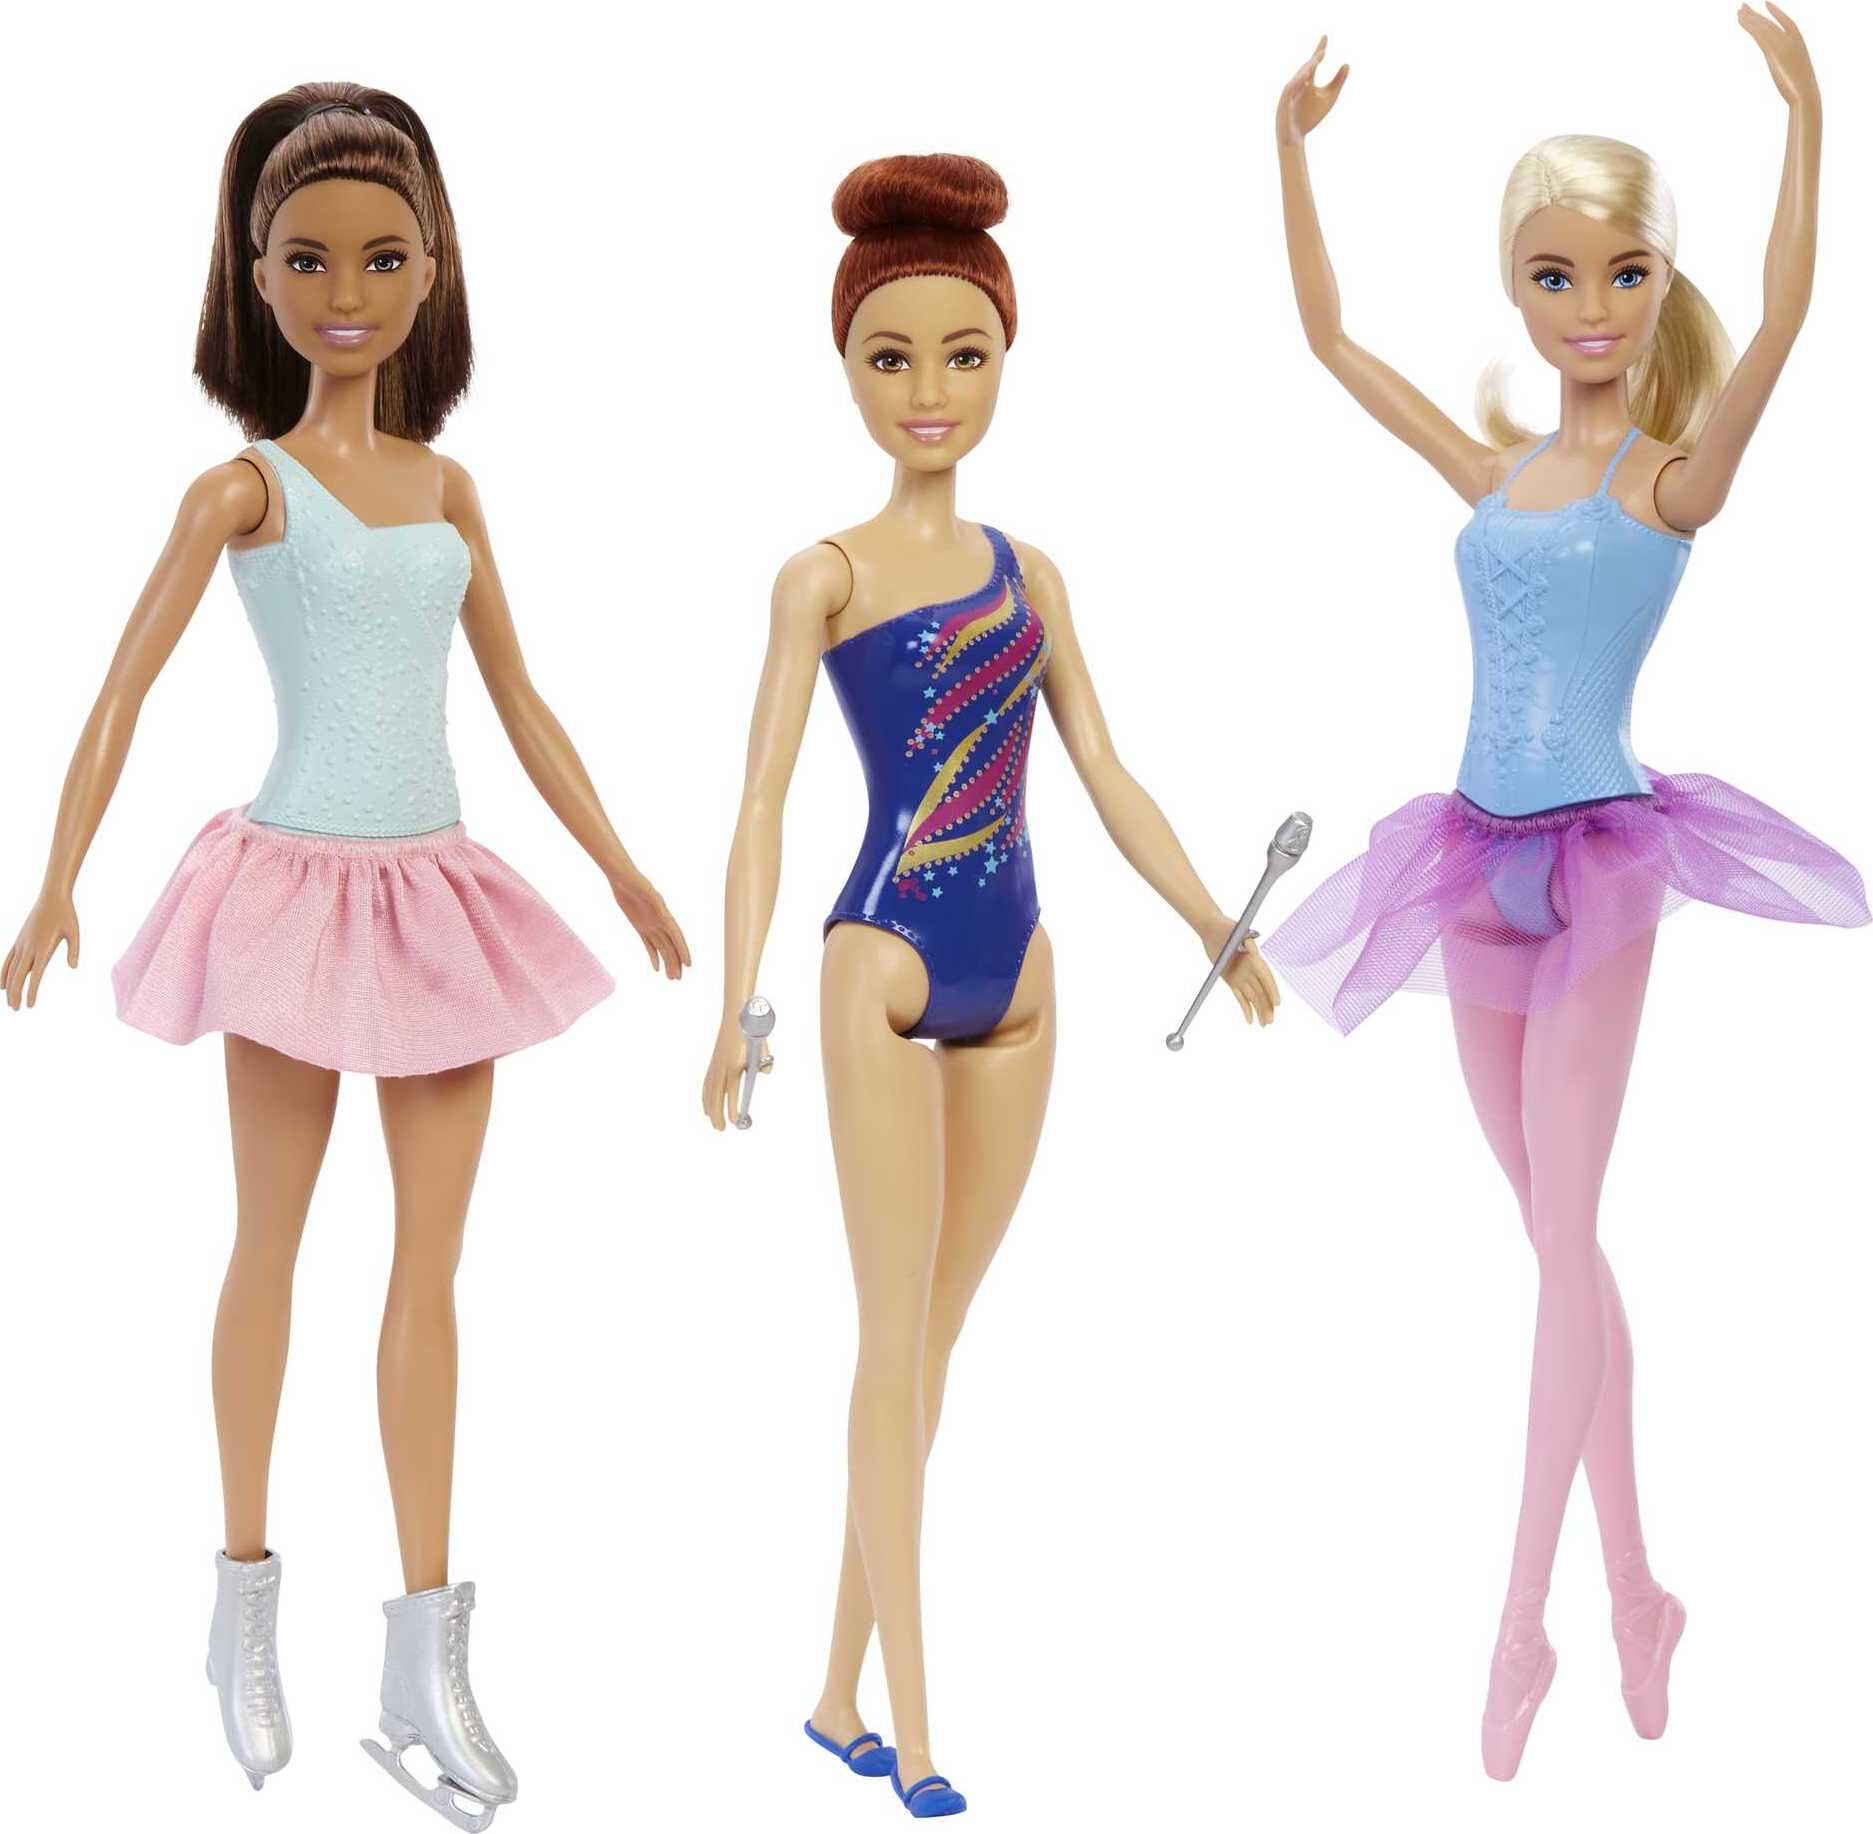 Barbie Doll Careers 6 Pack, Doll Collection Set with Related Career Outfits & Accessories - image 3 of 6